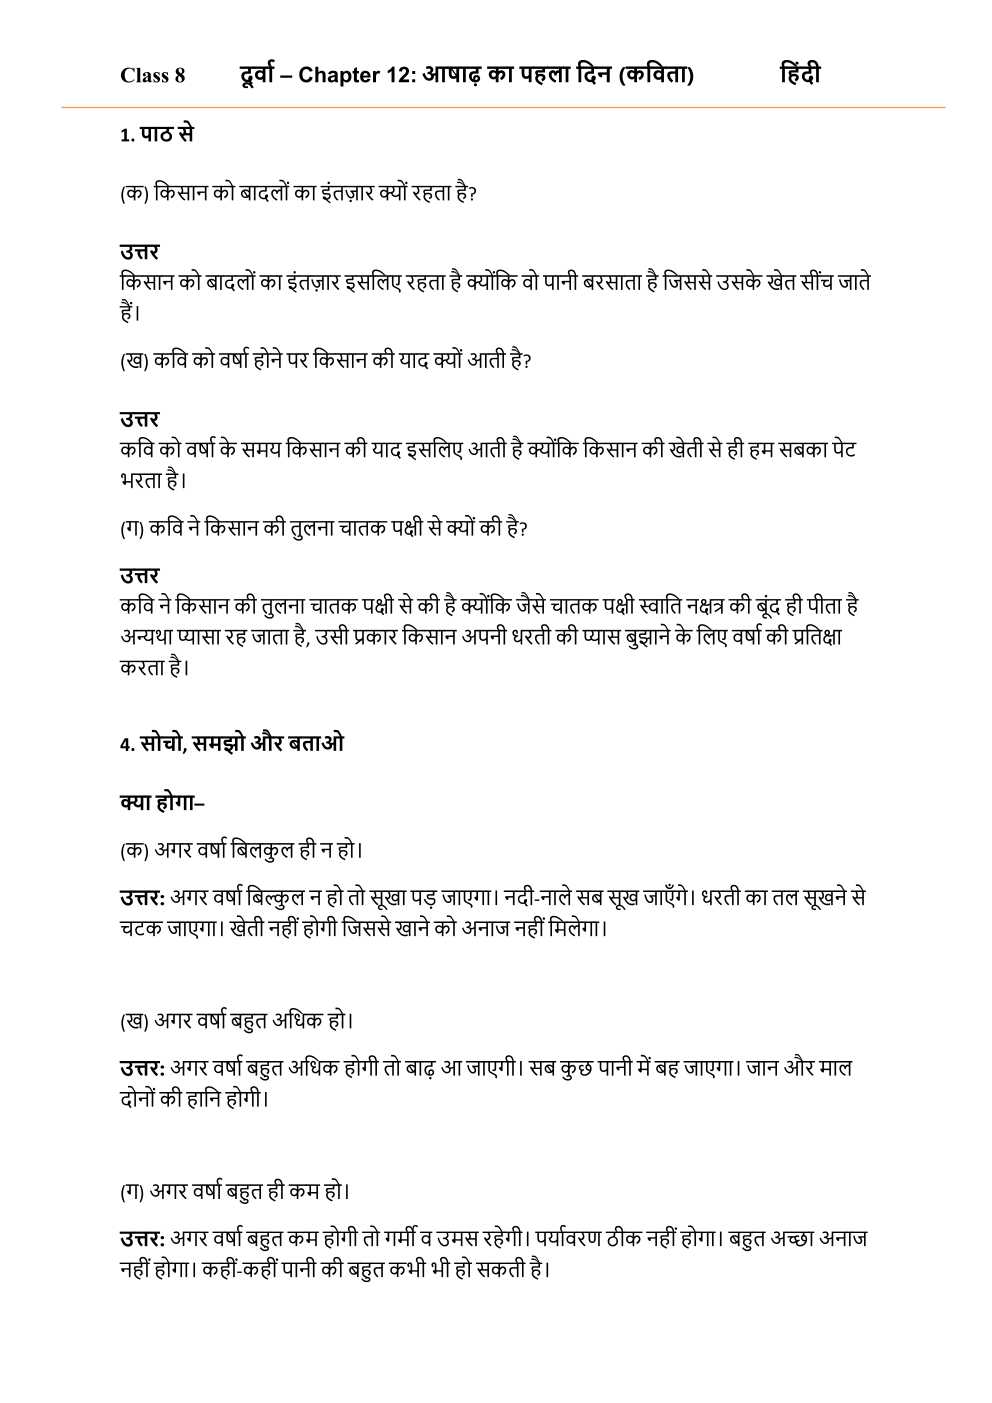 NCERT Solutions For Class 8 Hindi Durva Chapter 12